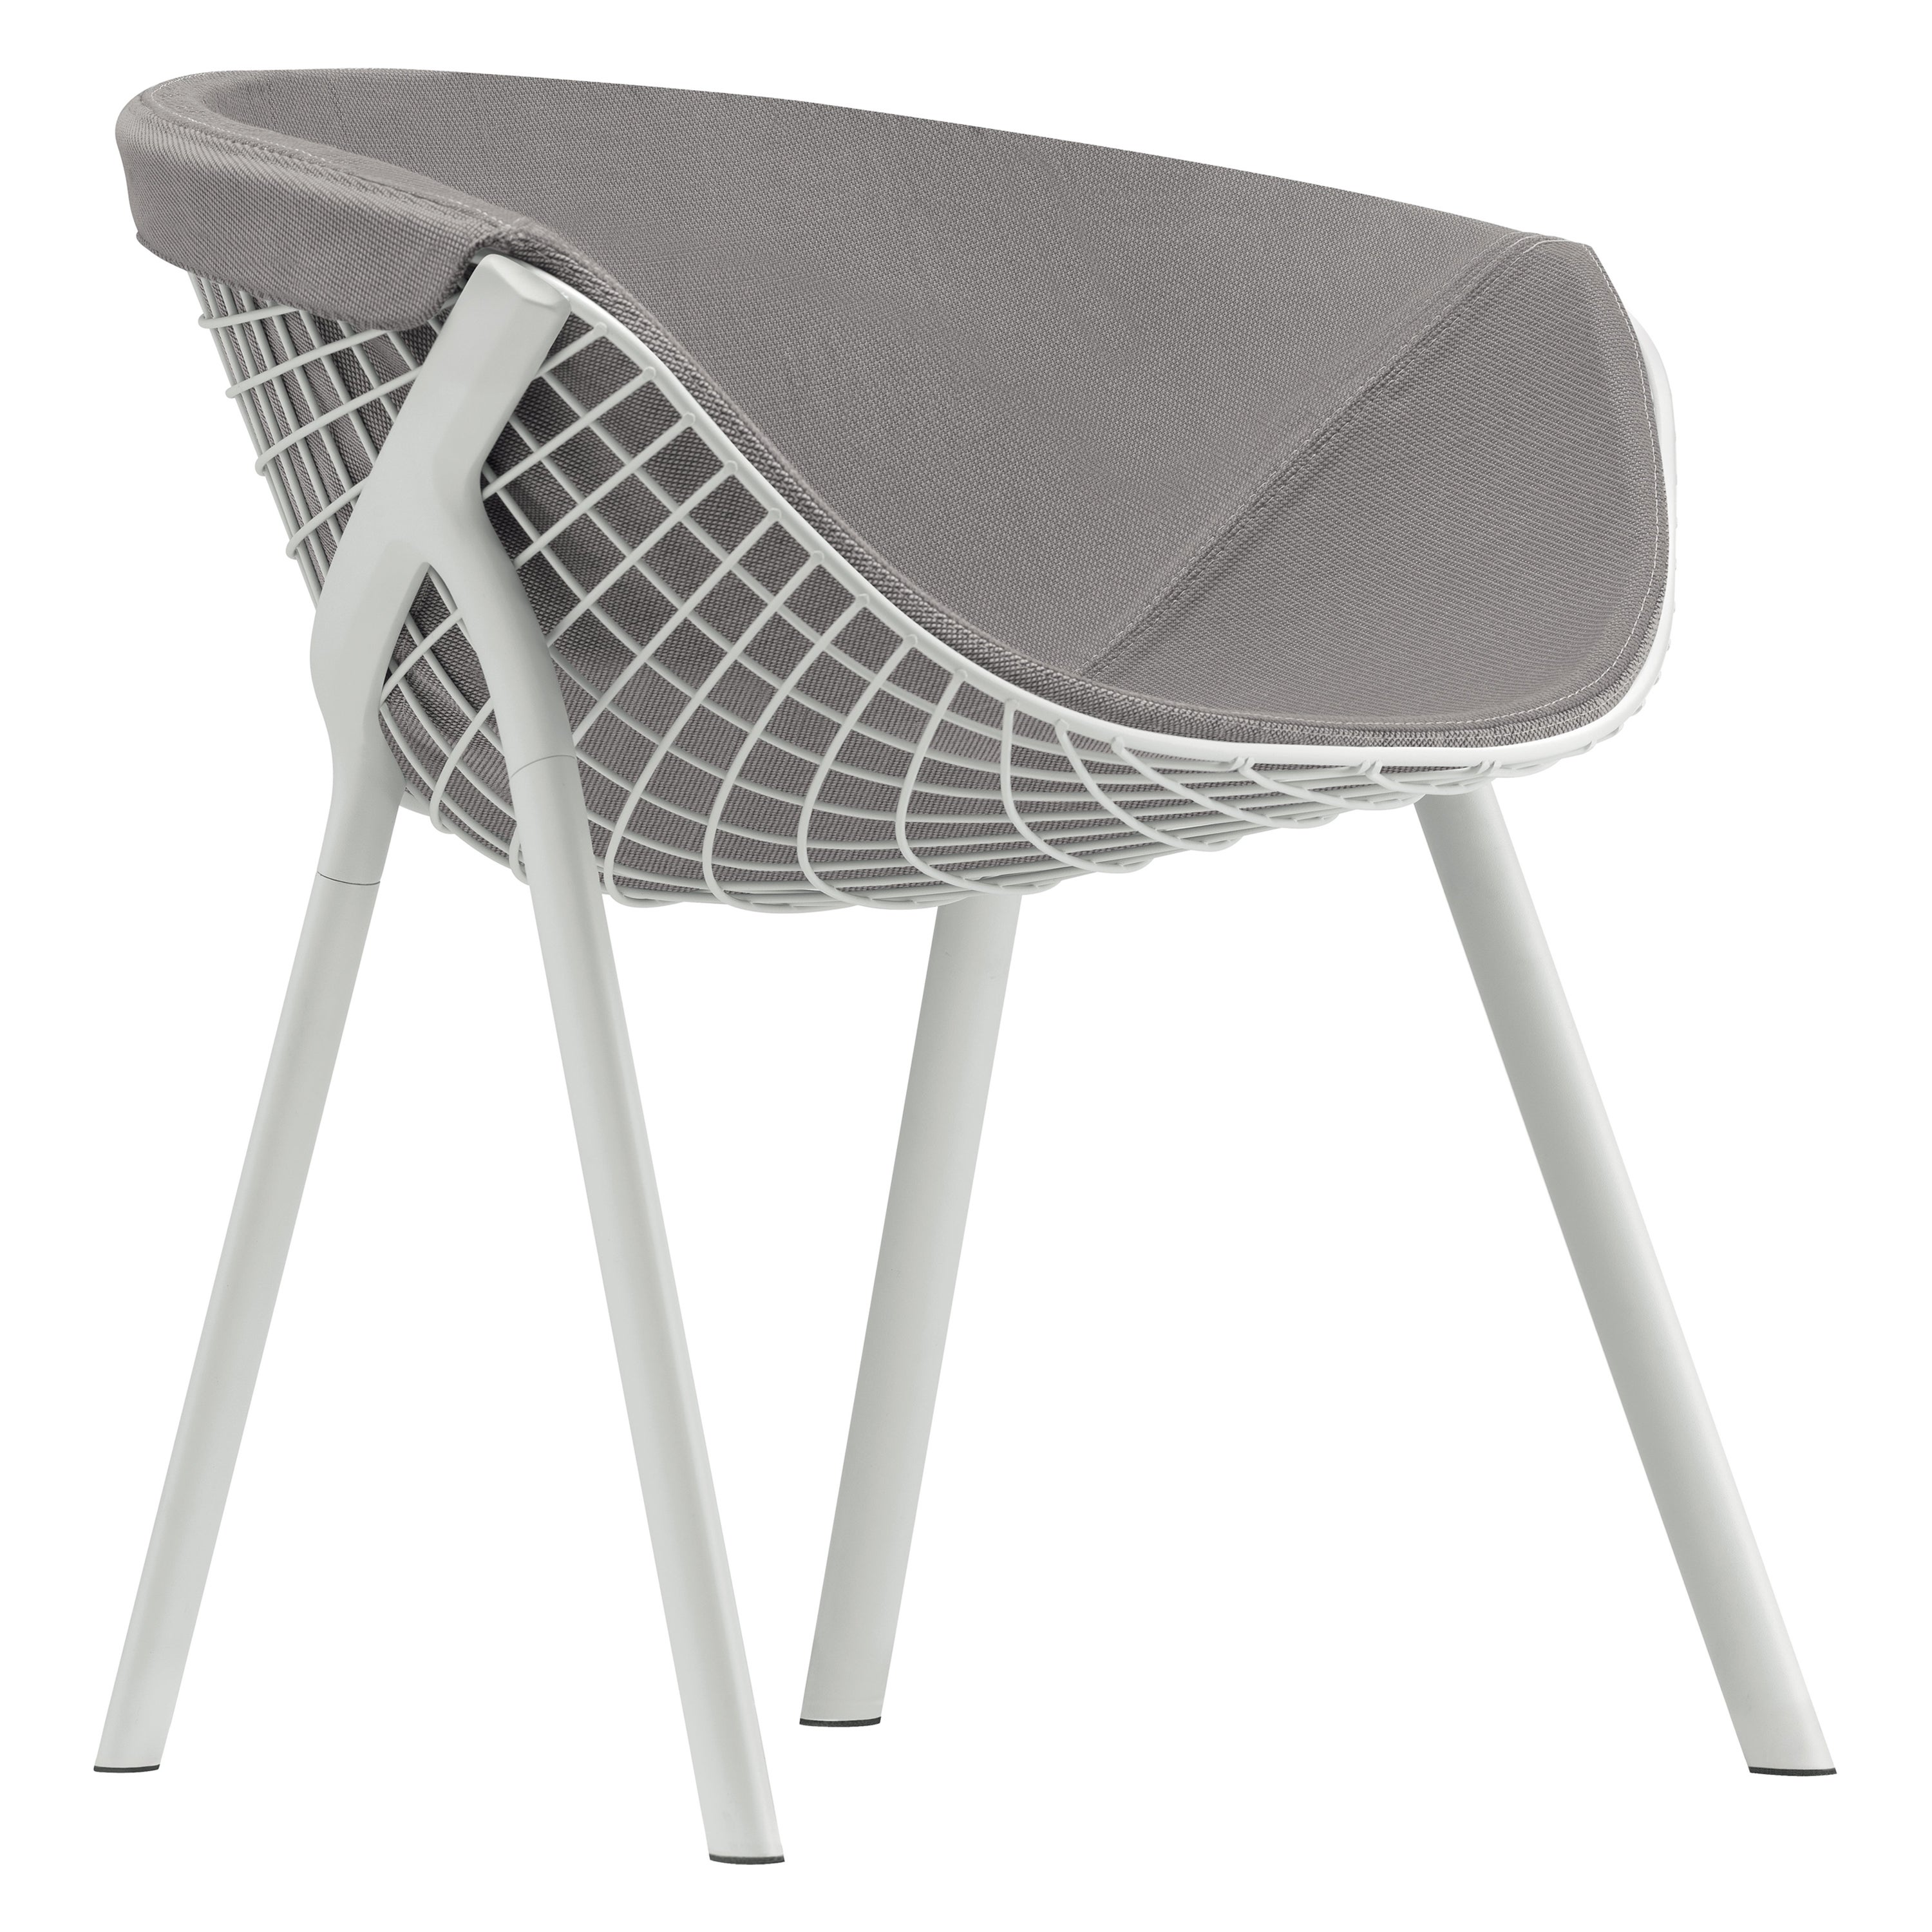 Alias 040 Kobi Chair with Large Pad in Grey and White Lacquered Aluminum Frame For Sale